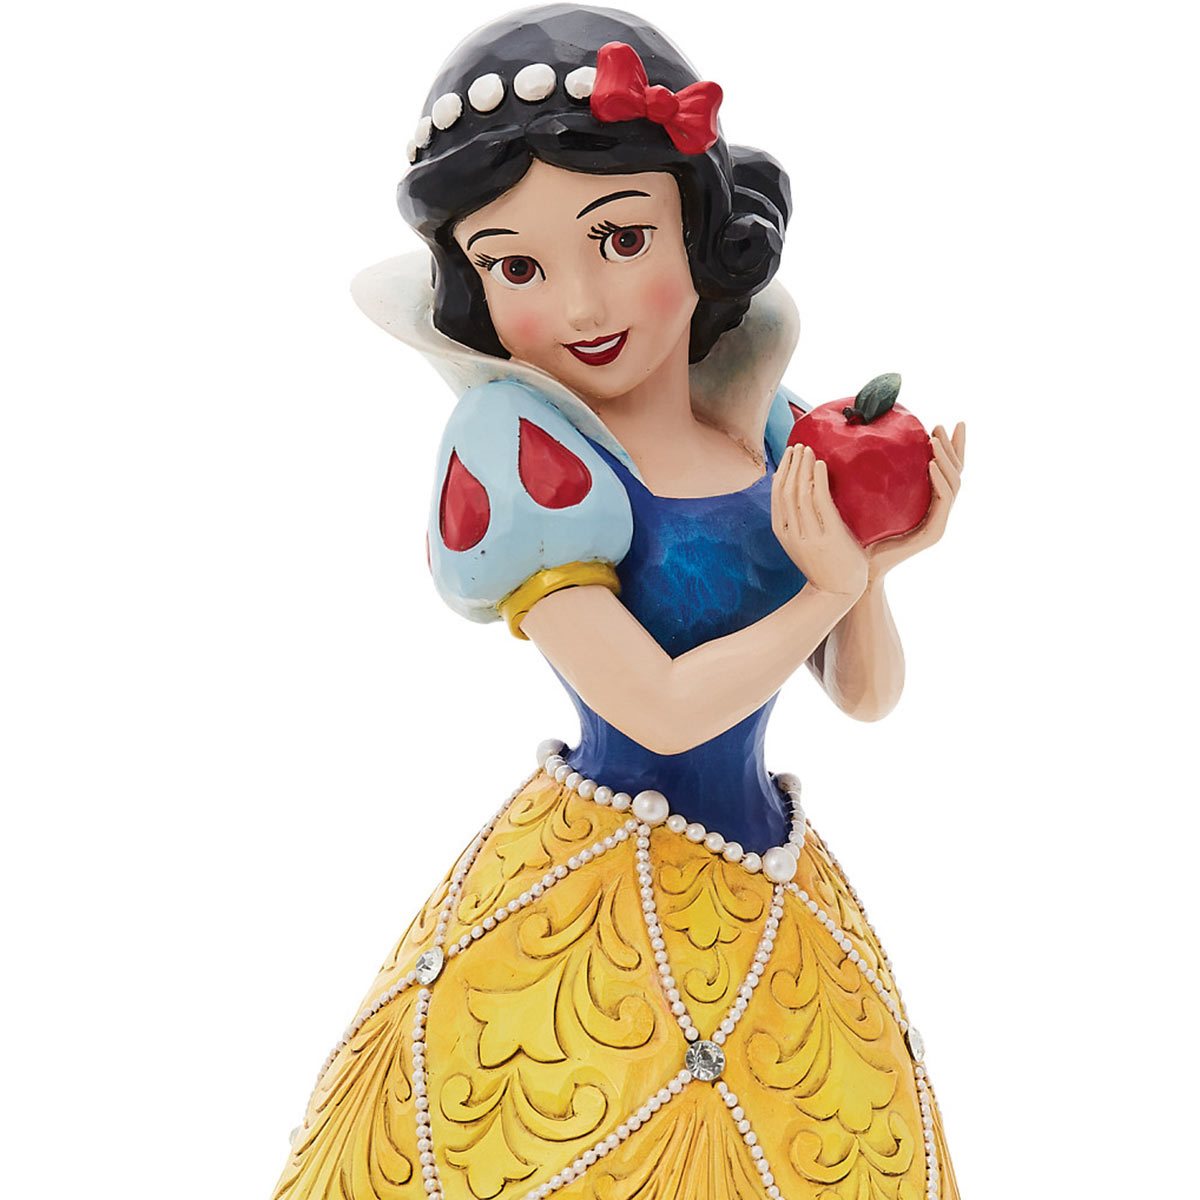 Enesco Disney Traditions by Jim Shore Snow White and The Seven Dwarfs  Standing on Log Figurine, 8.25 Inch, Multicolor